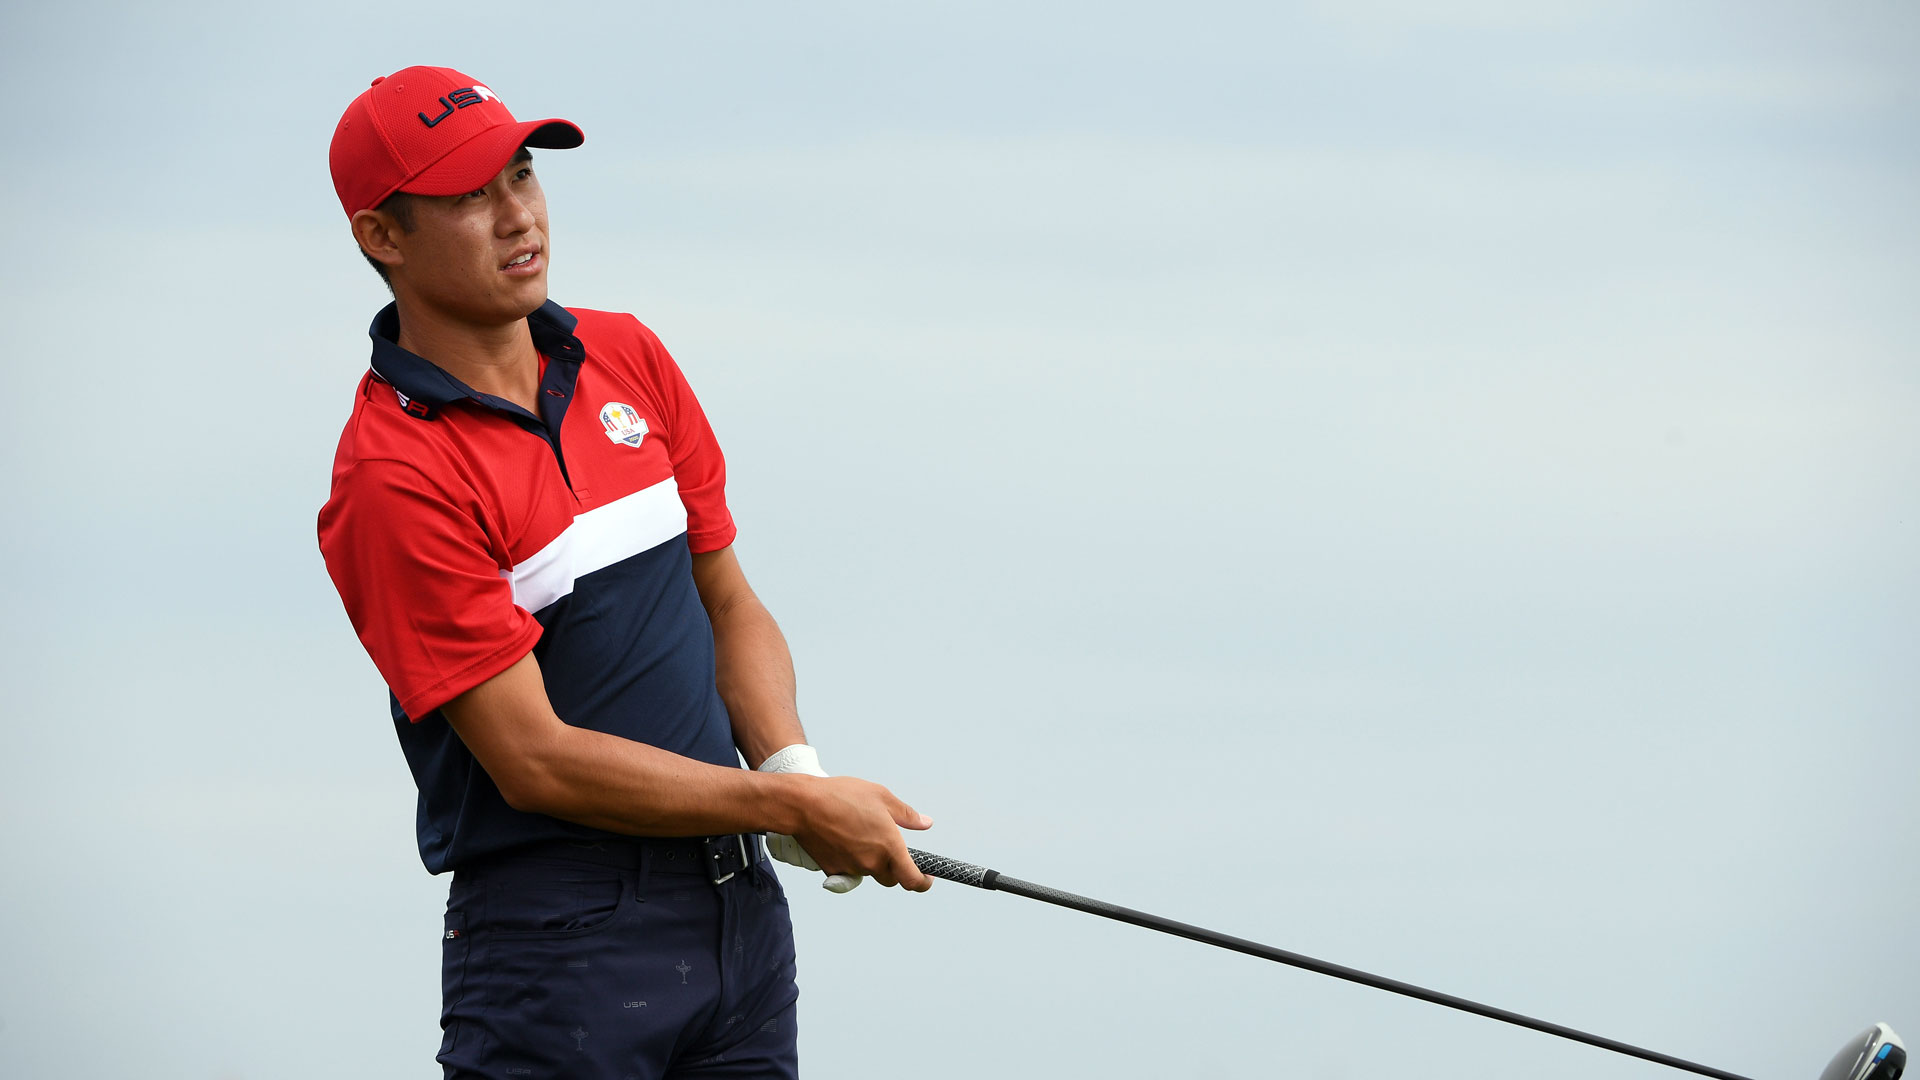 2021 Ryder Cup How to watch, stream info, results, tee times